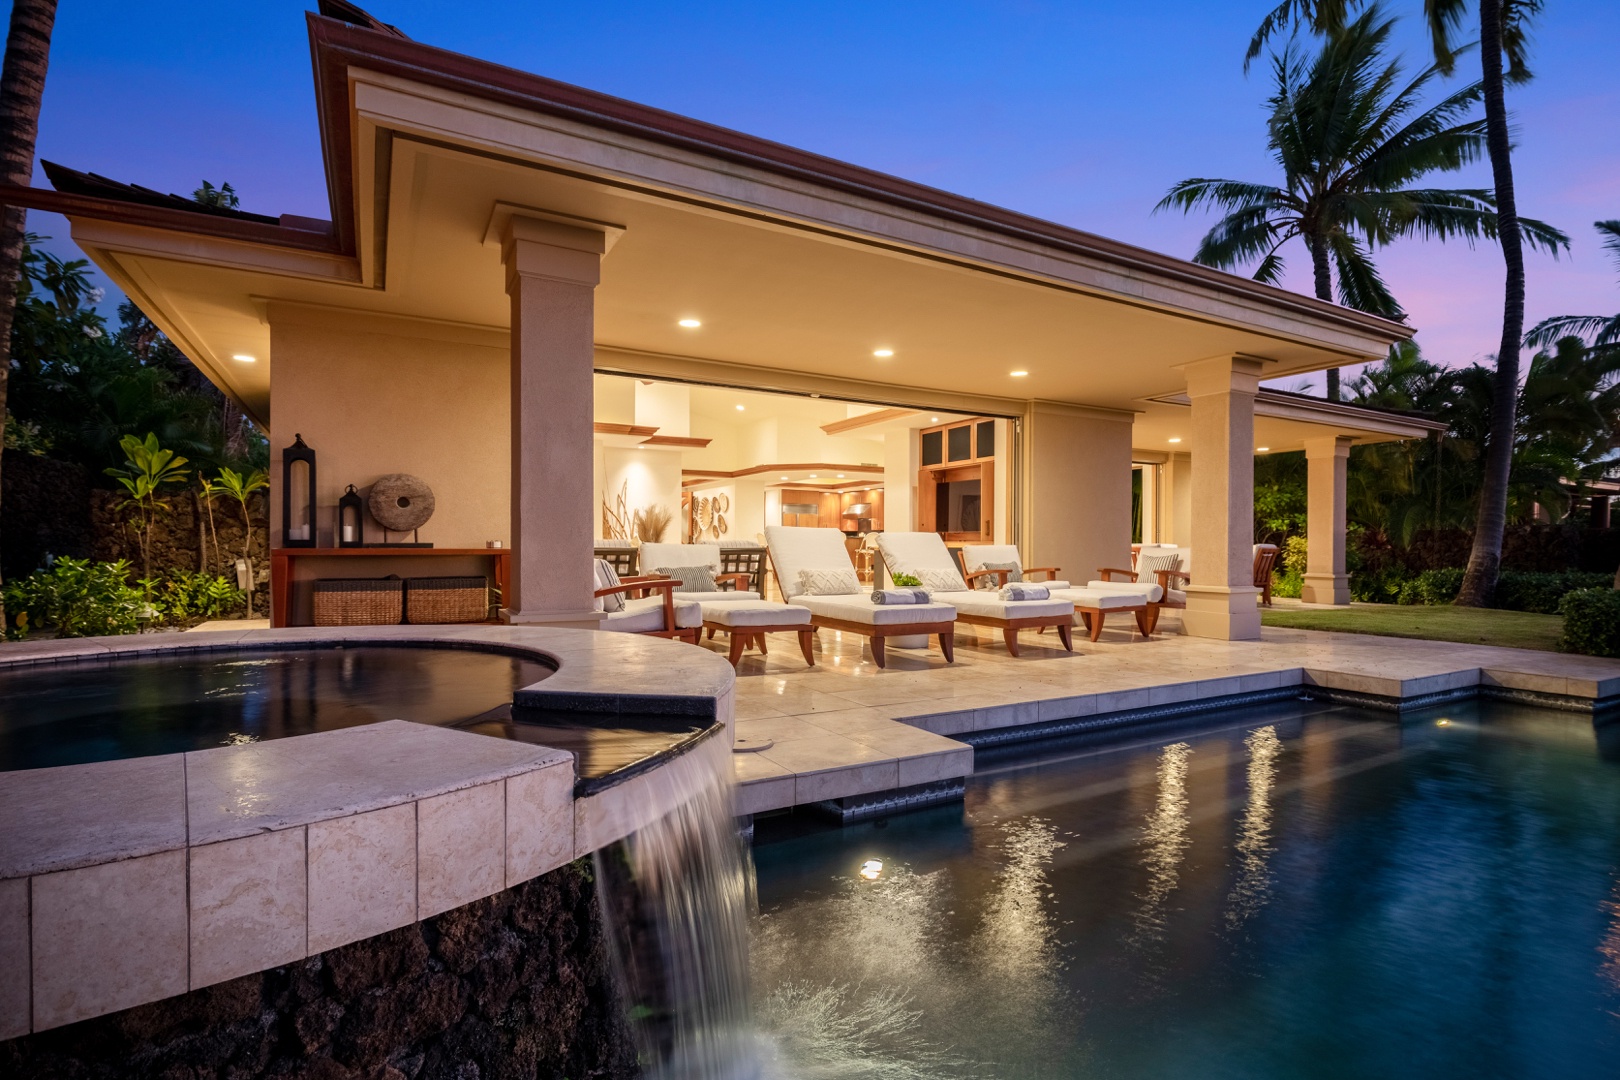 Kailua Kona Vacation Rentals, 4BD Pakui Street (147) Estate Home at Four Seasons Resort at Hualalai - Angle on the private spa with waterfall feature into the infinity pool.